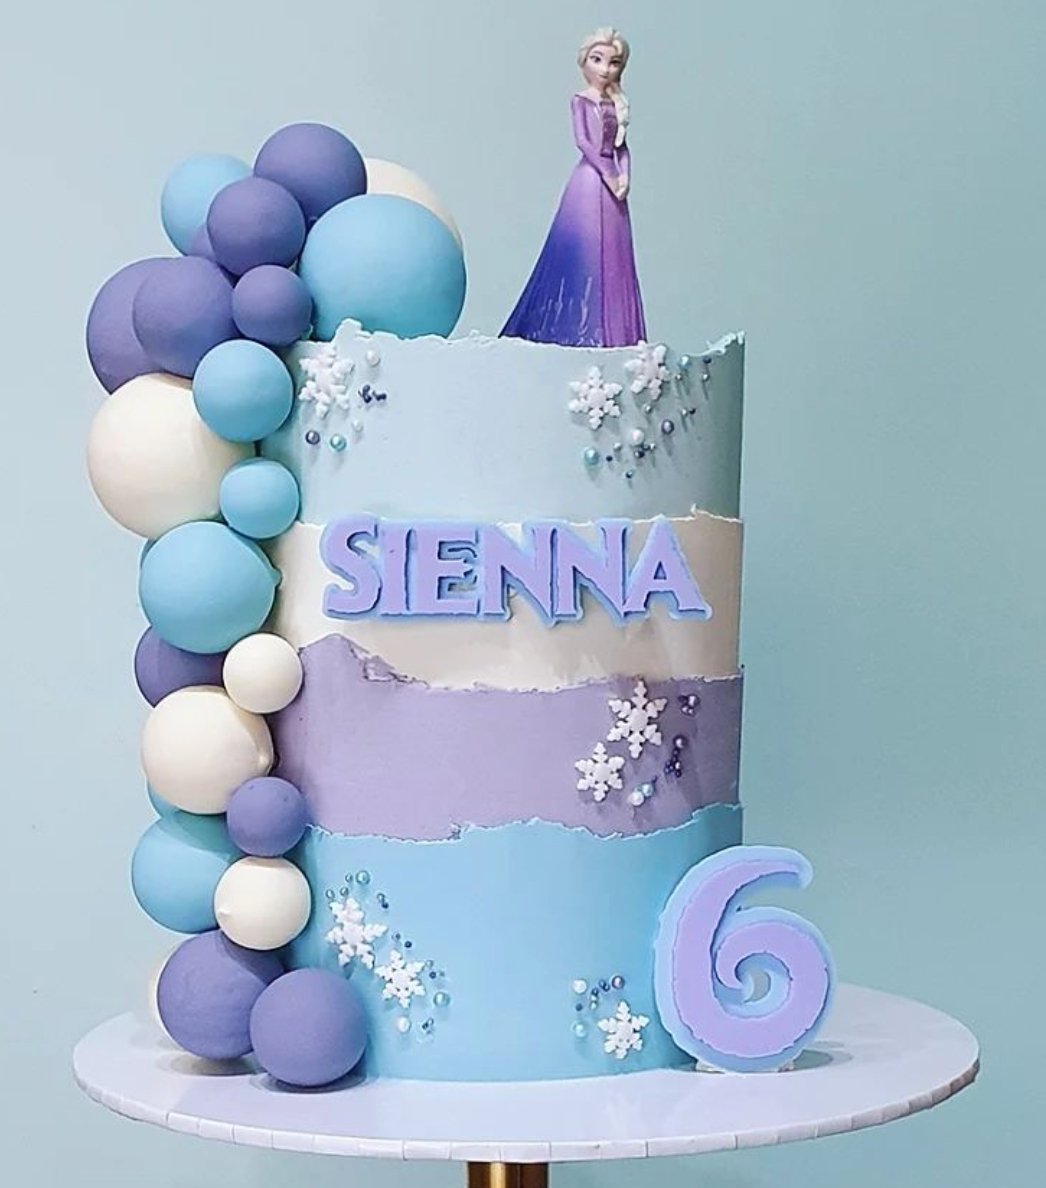 Frozen themed birthday cake | Design was brought in by clien… | Flickr